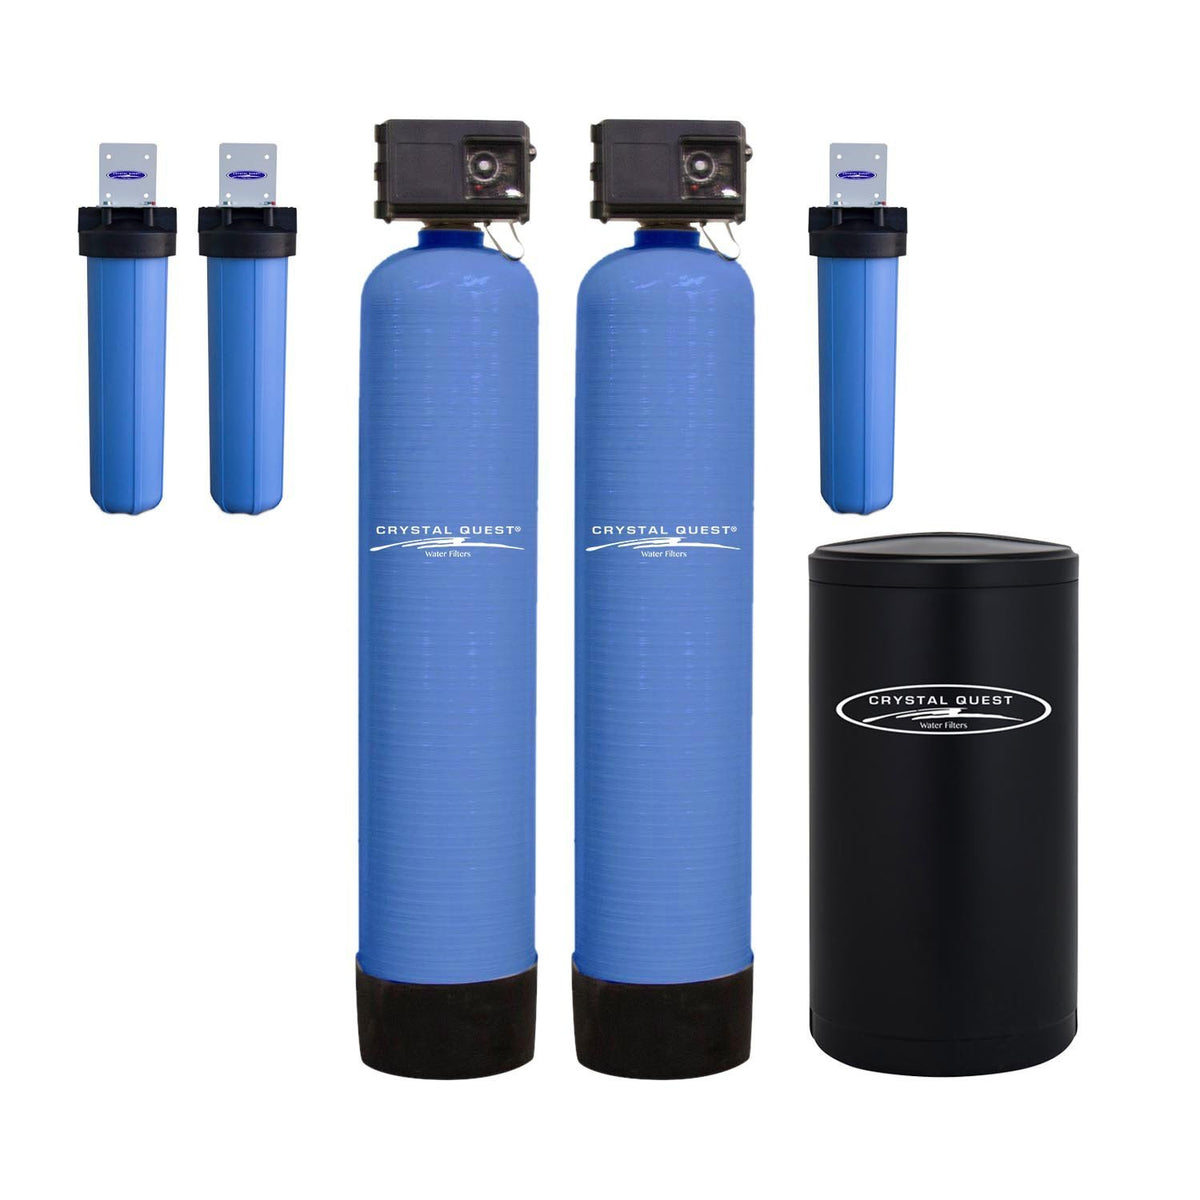 High Flow Whole House Water Filter - Whole House Water Filters - Crystal Quest Water Filters